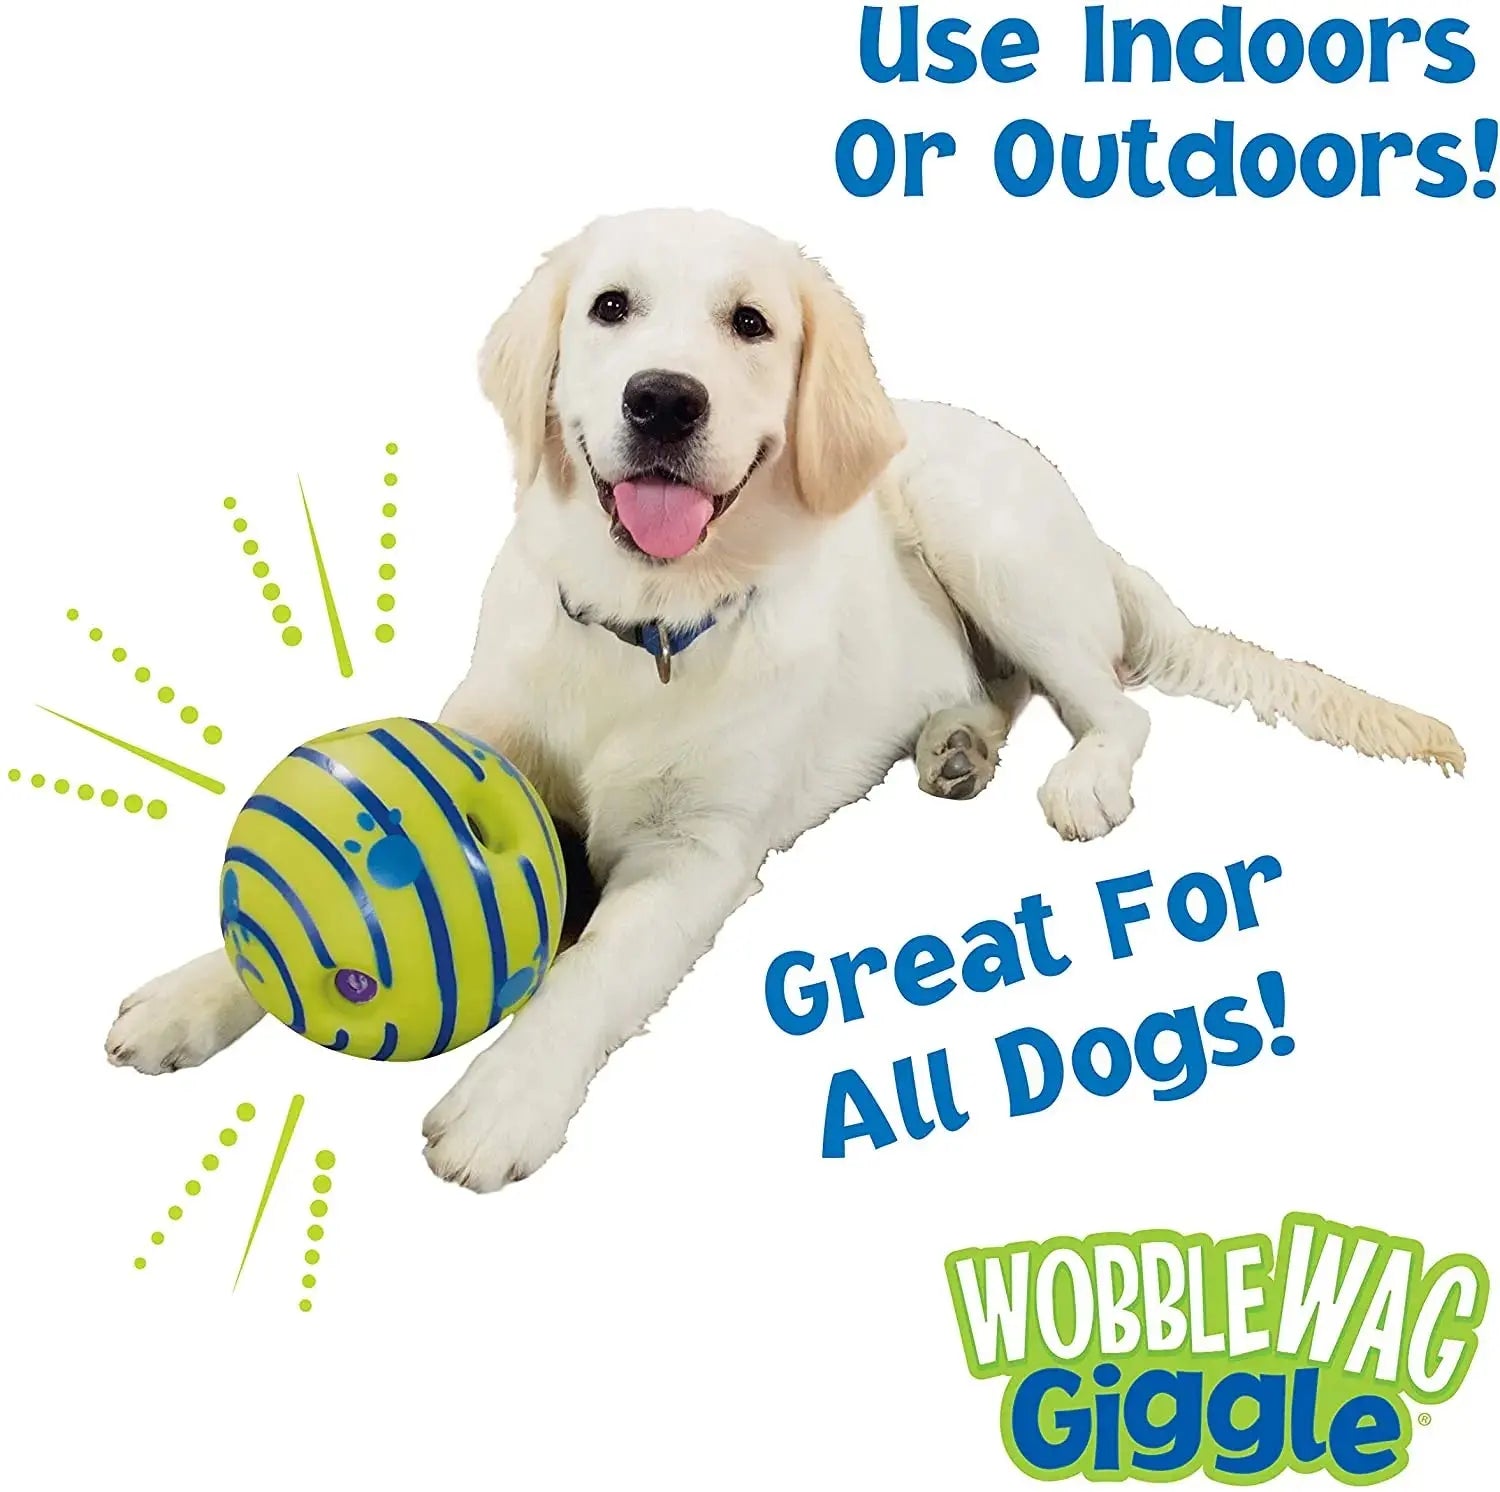 Wobble Wag Giggle Glow Ball Interactive Dog Toy Fun Giggle Sounds When Rolled or Shaken Pets Know Best As Seen On TV My Magnolia Shop